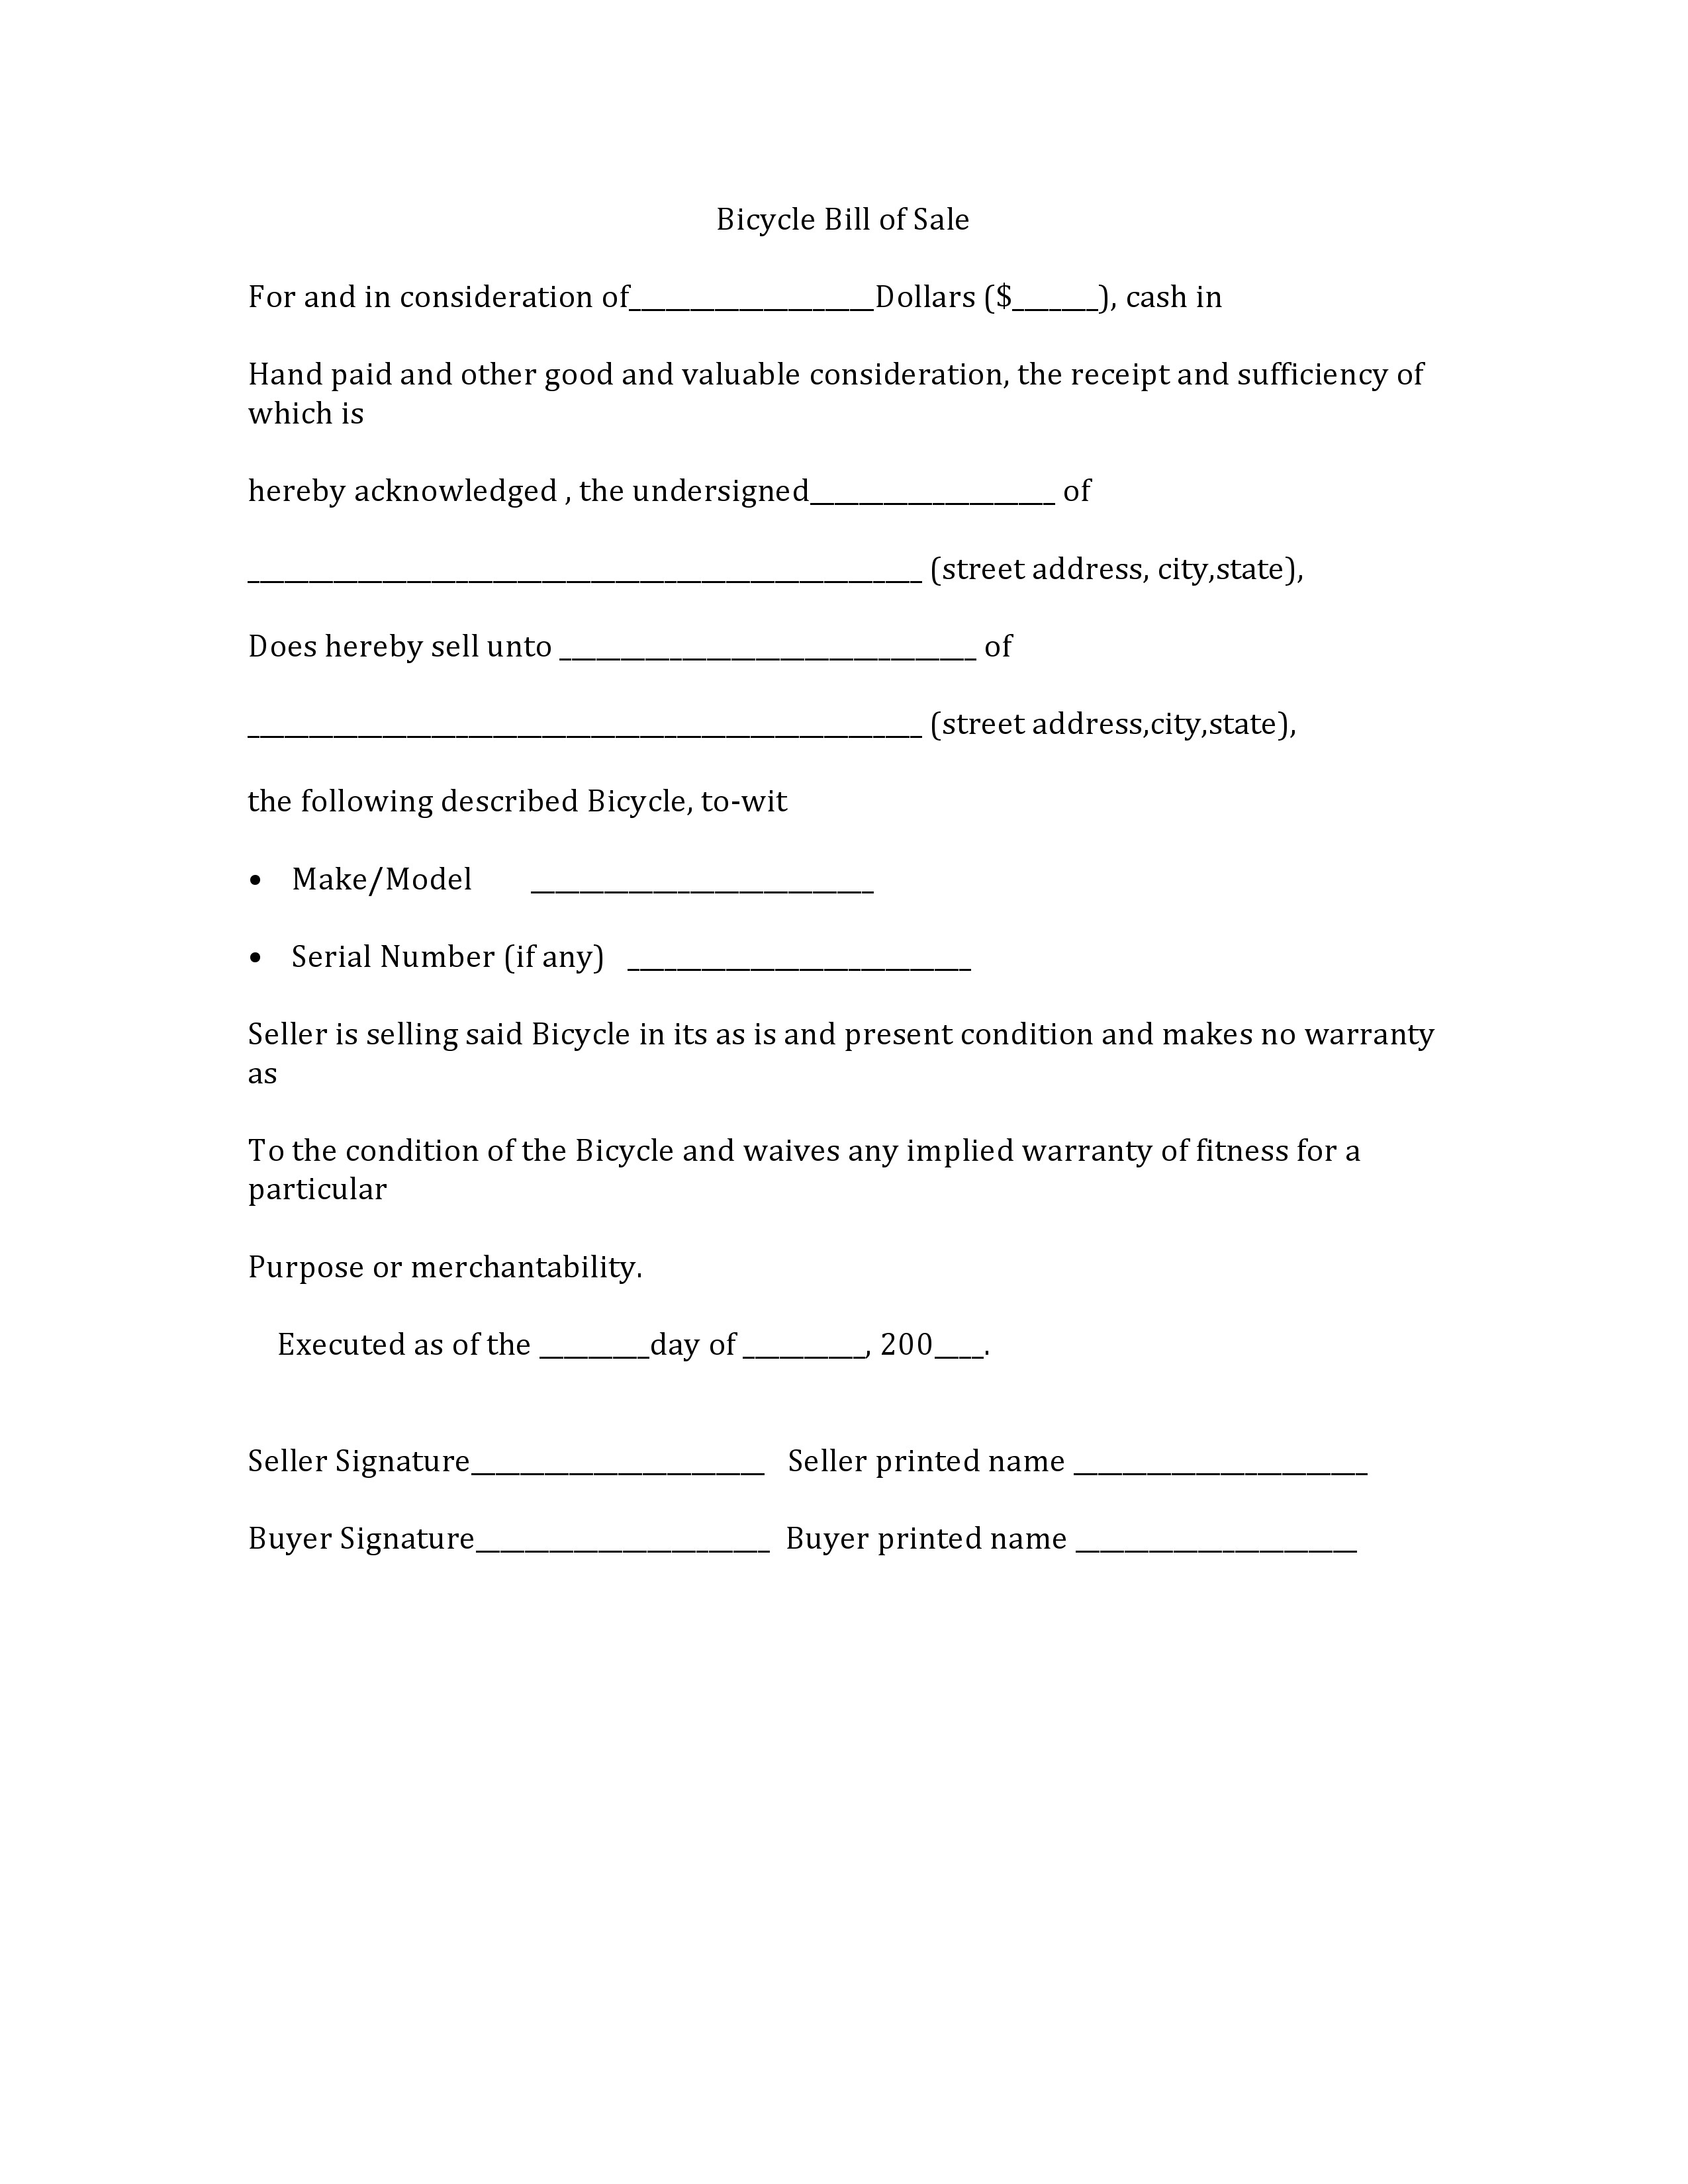 Bicycle Bill of Sale Form